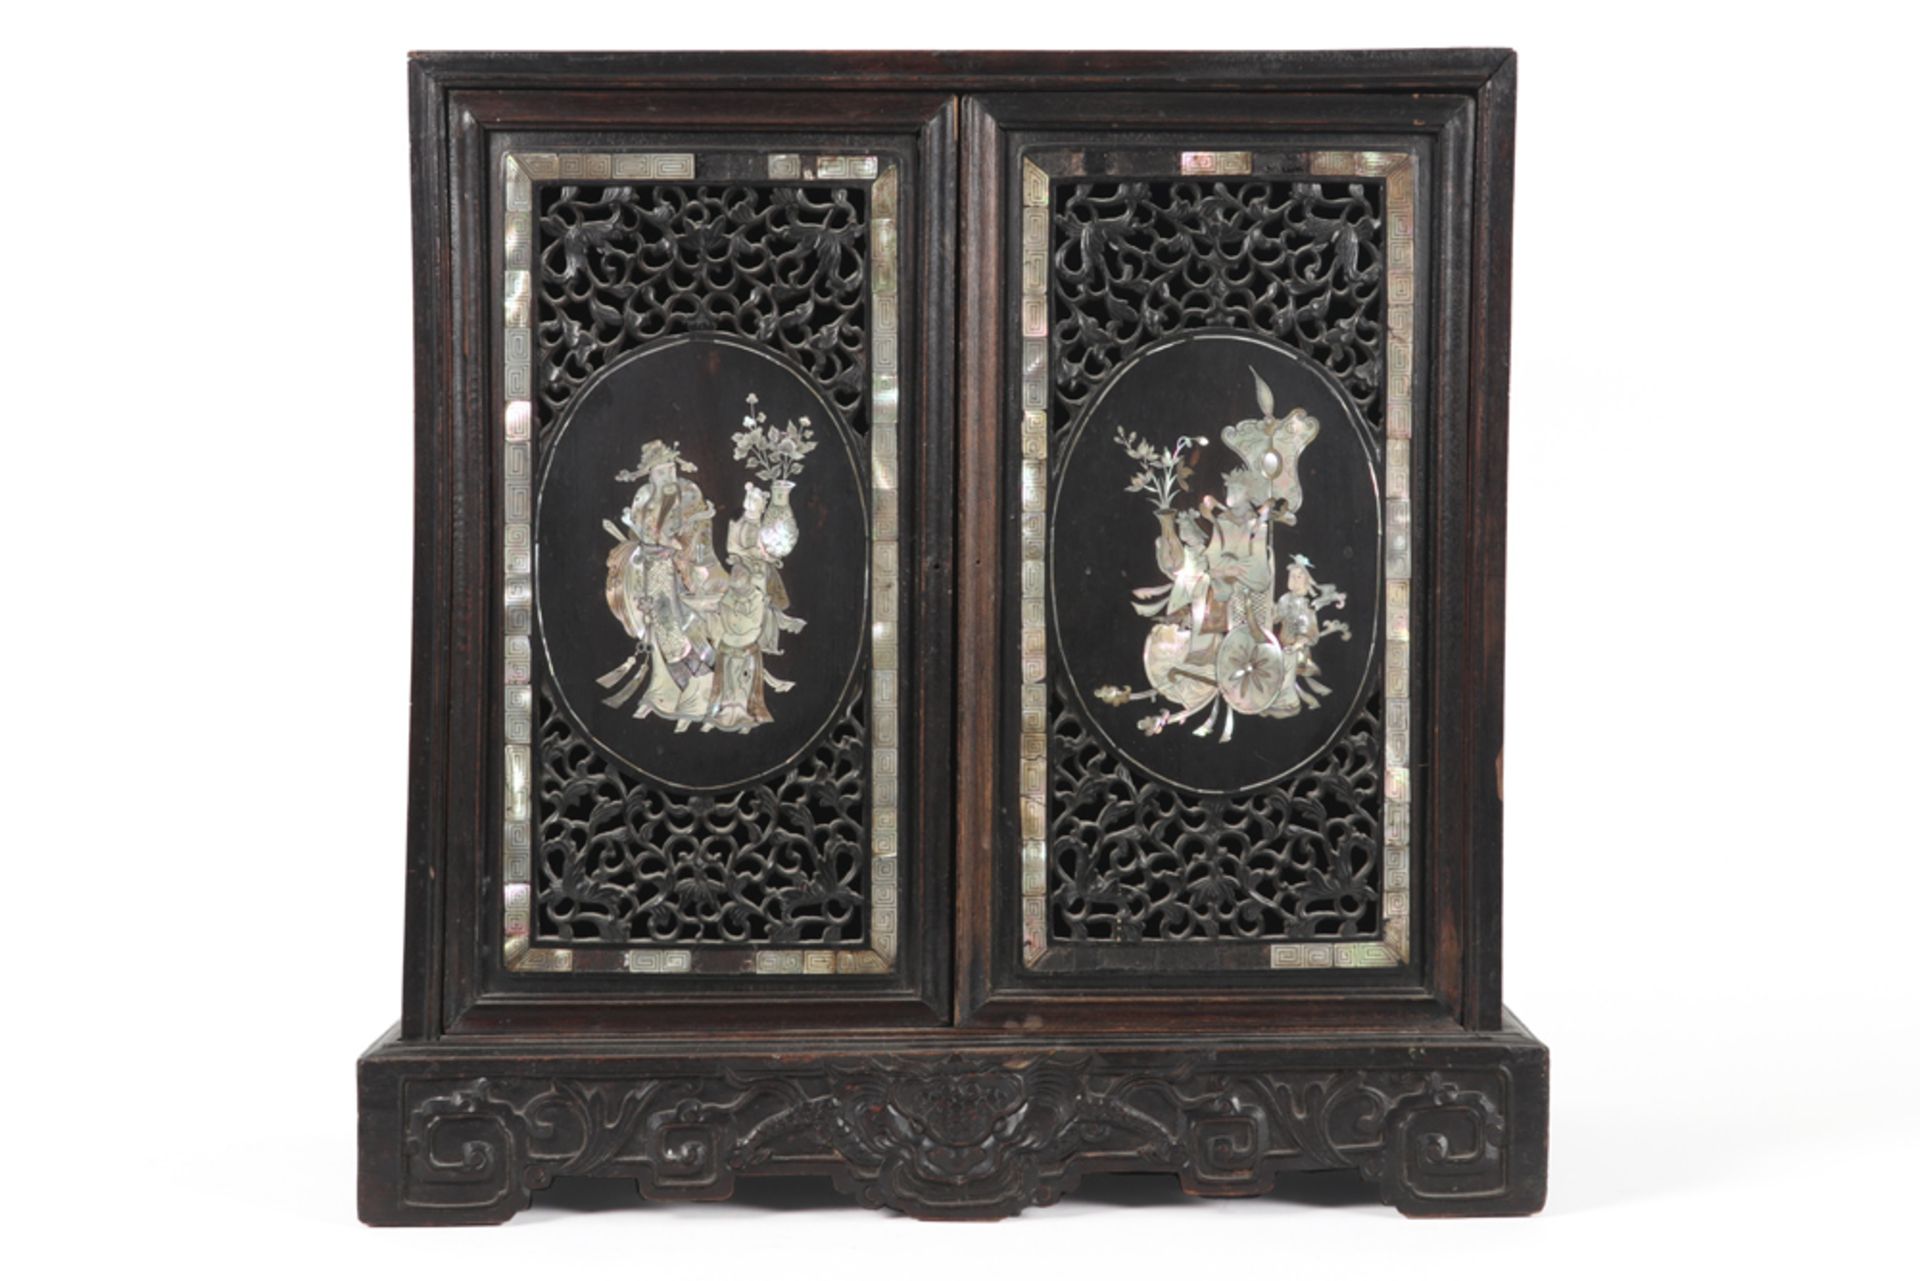 small antique Sino-Vietnamese cabinet with mother pearl inlay || Antiek Sino-Vietnamees kabinetje - Image 2 of 5